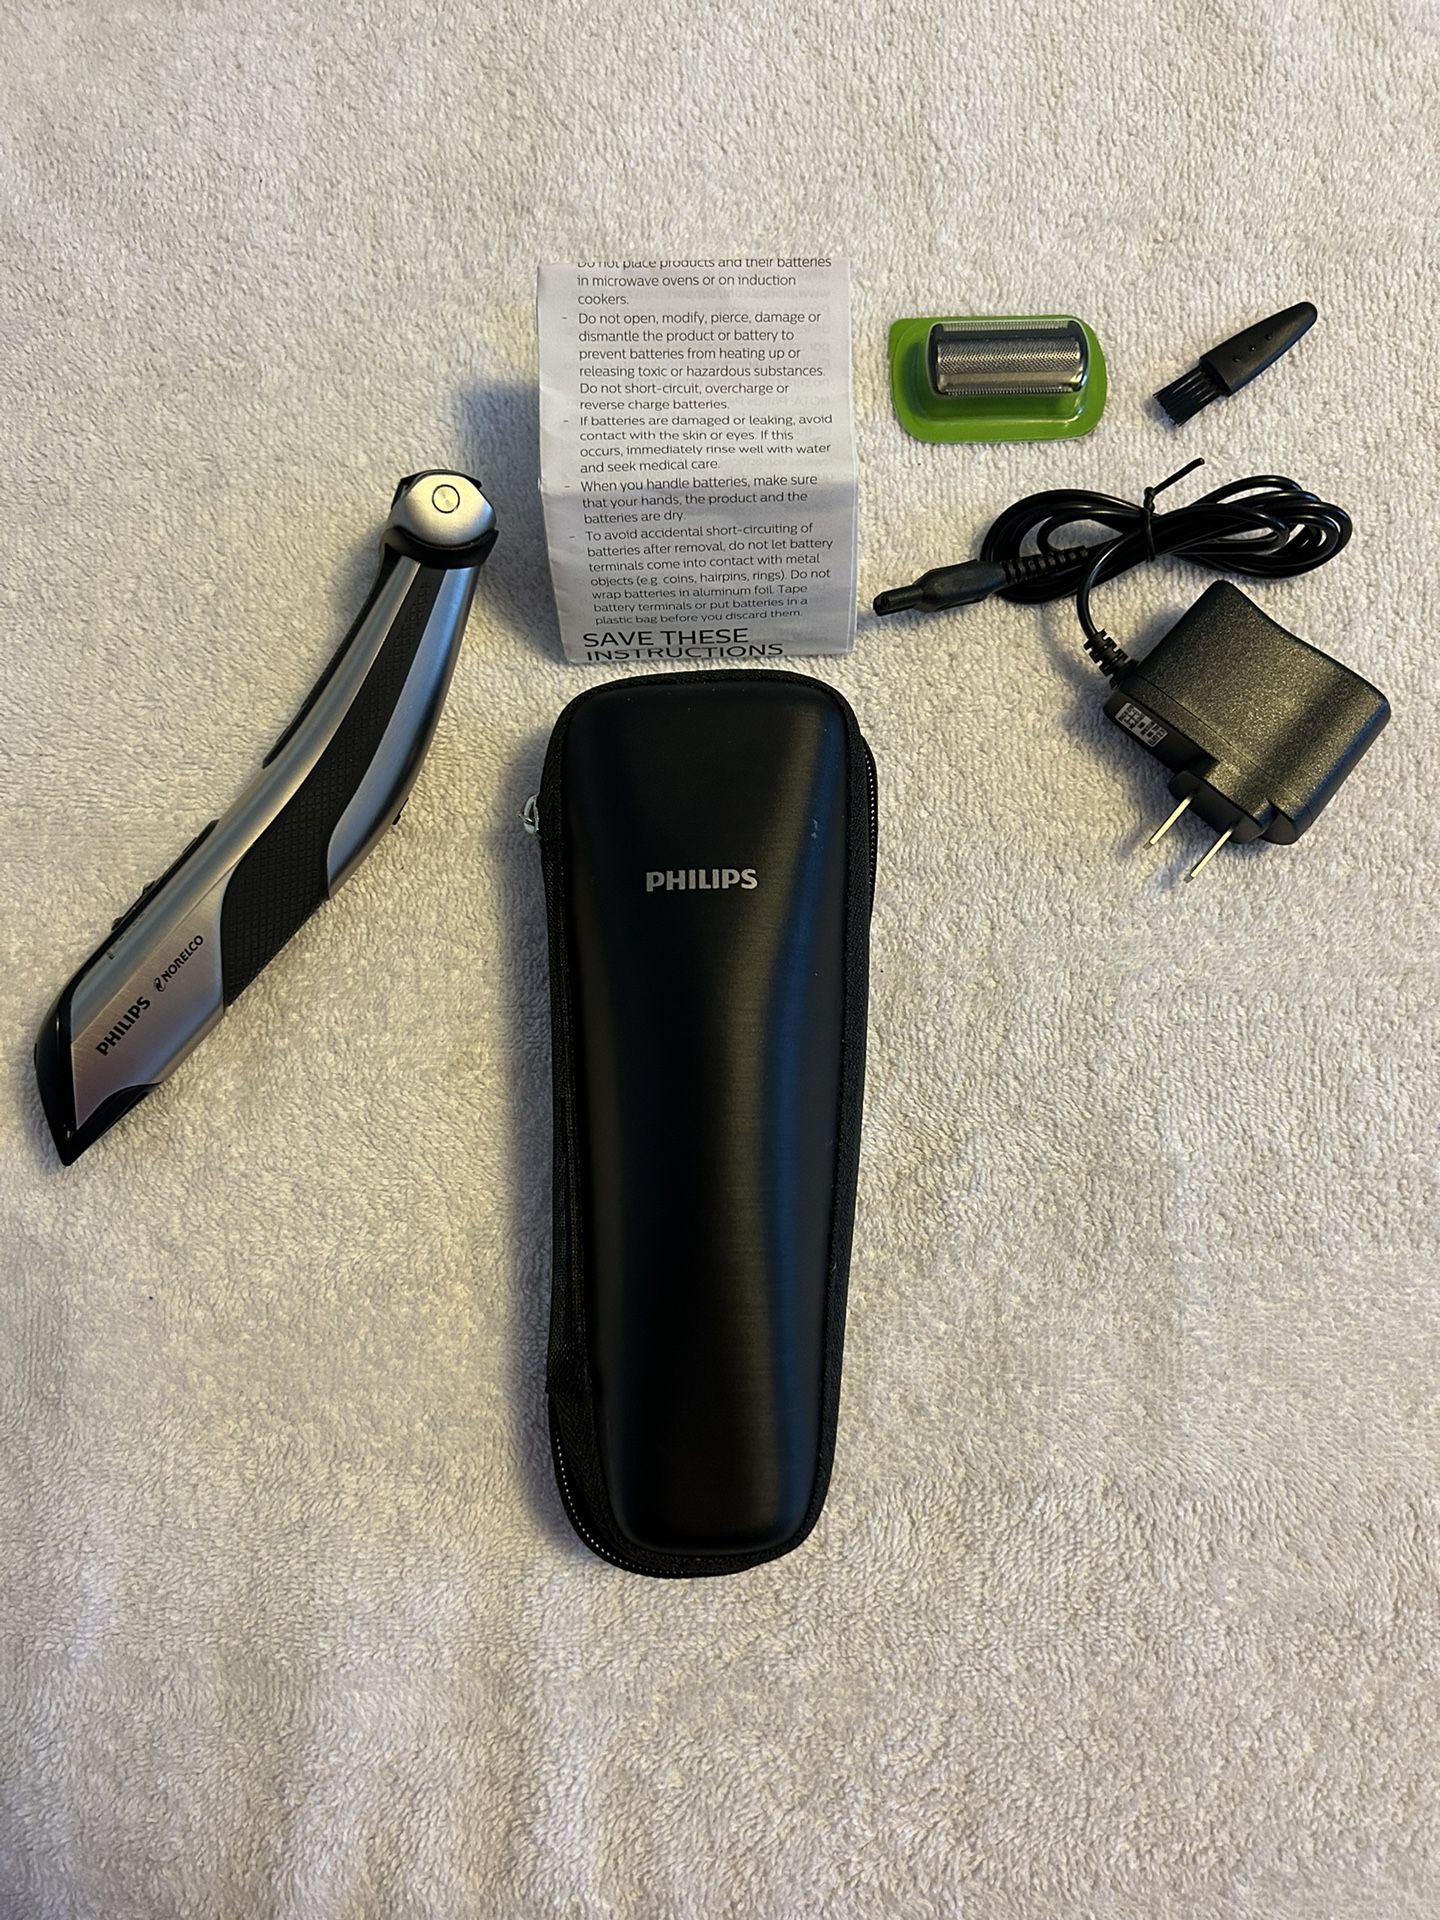 Phillips Norelco Body grooming Shower Proof Seriers 7000 Hair Trimming/ Electric Shaving Tool